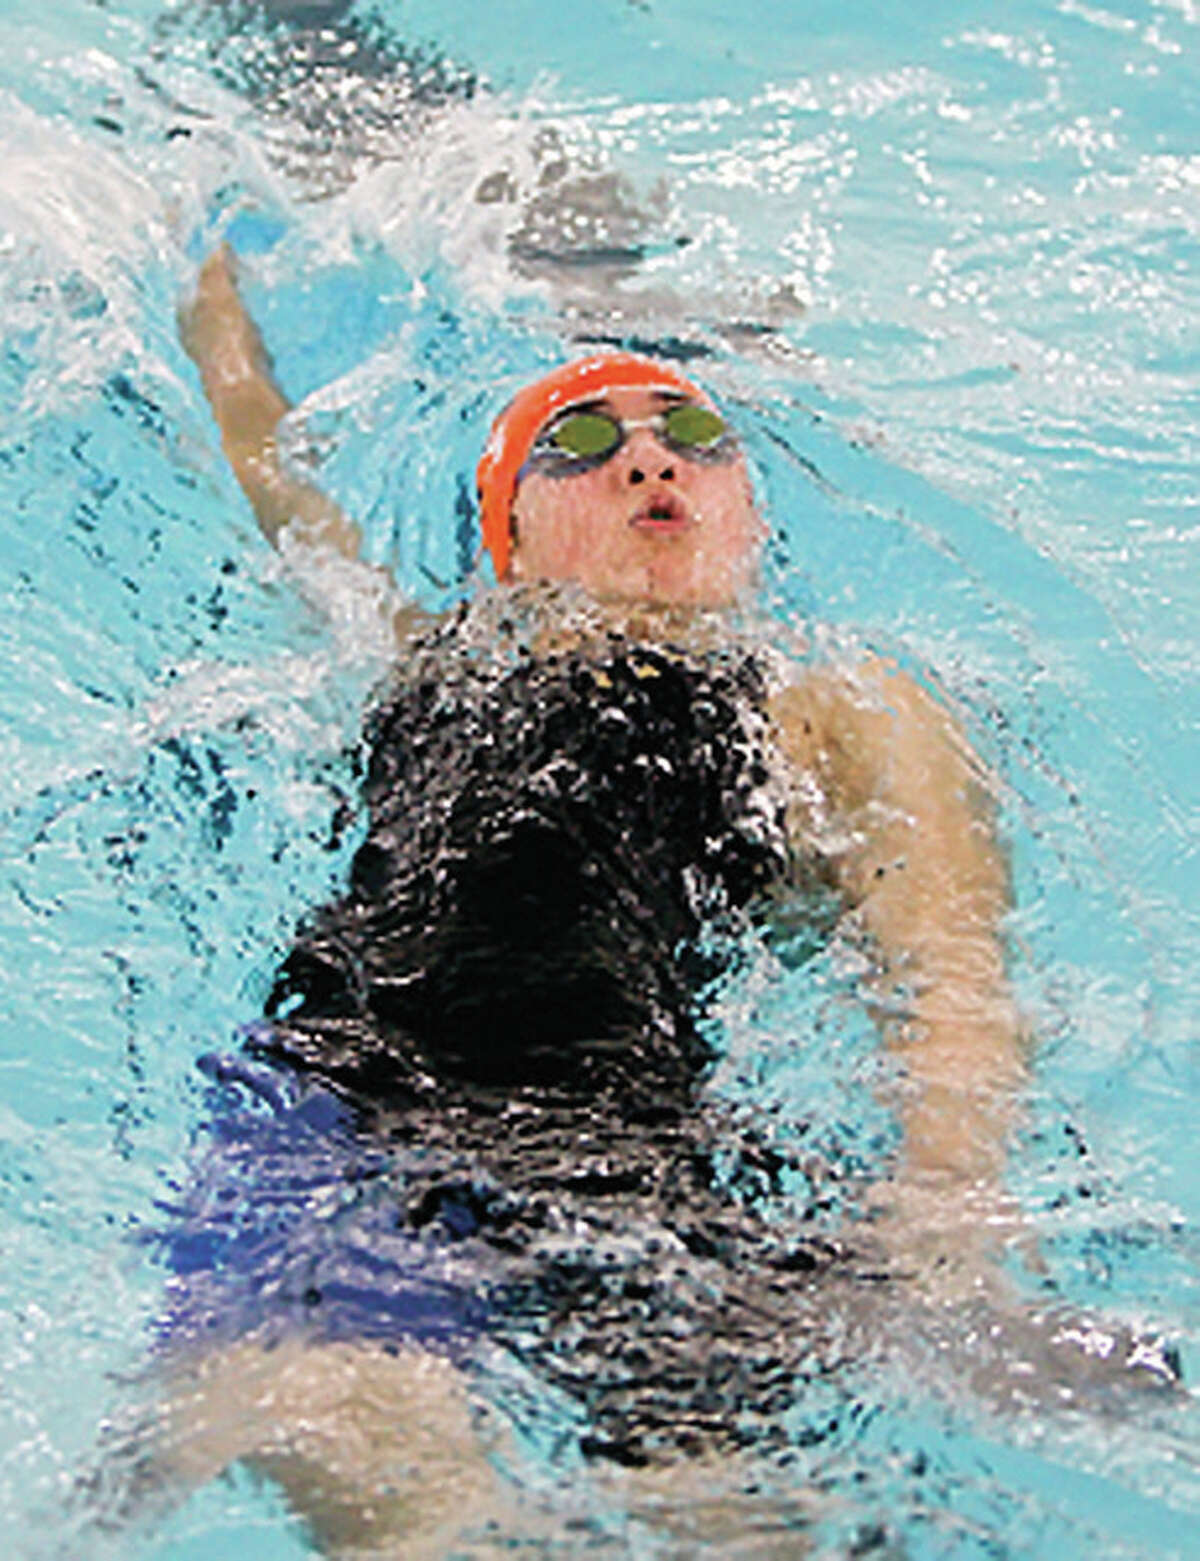 Edwardsville’s Sahar Rabeie is one of the Breakers who will be taking part in the Ozarks Long Course Championships this weekend at the Chuck Fruit Aquatic Center.